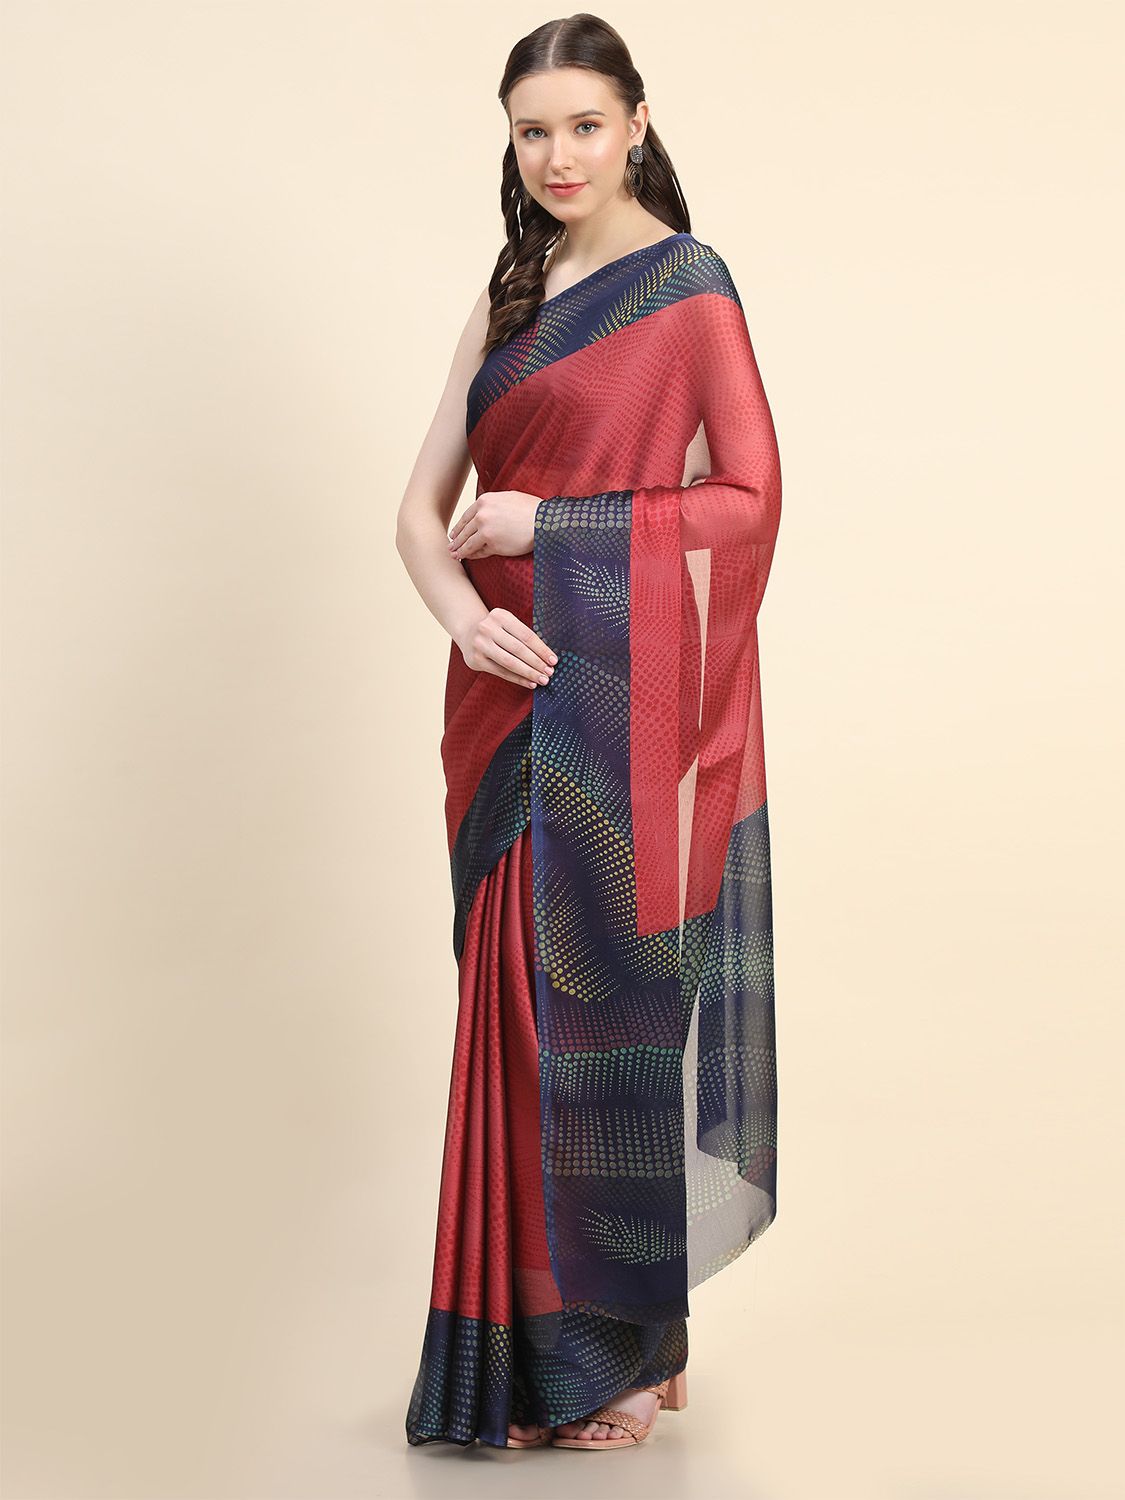 Leeza Store Women's Red Chiffon Brasso Fancy Abstract Printed Trendy Saree With Running Blouse Piece - LZPKSBOB-Red - Red